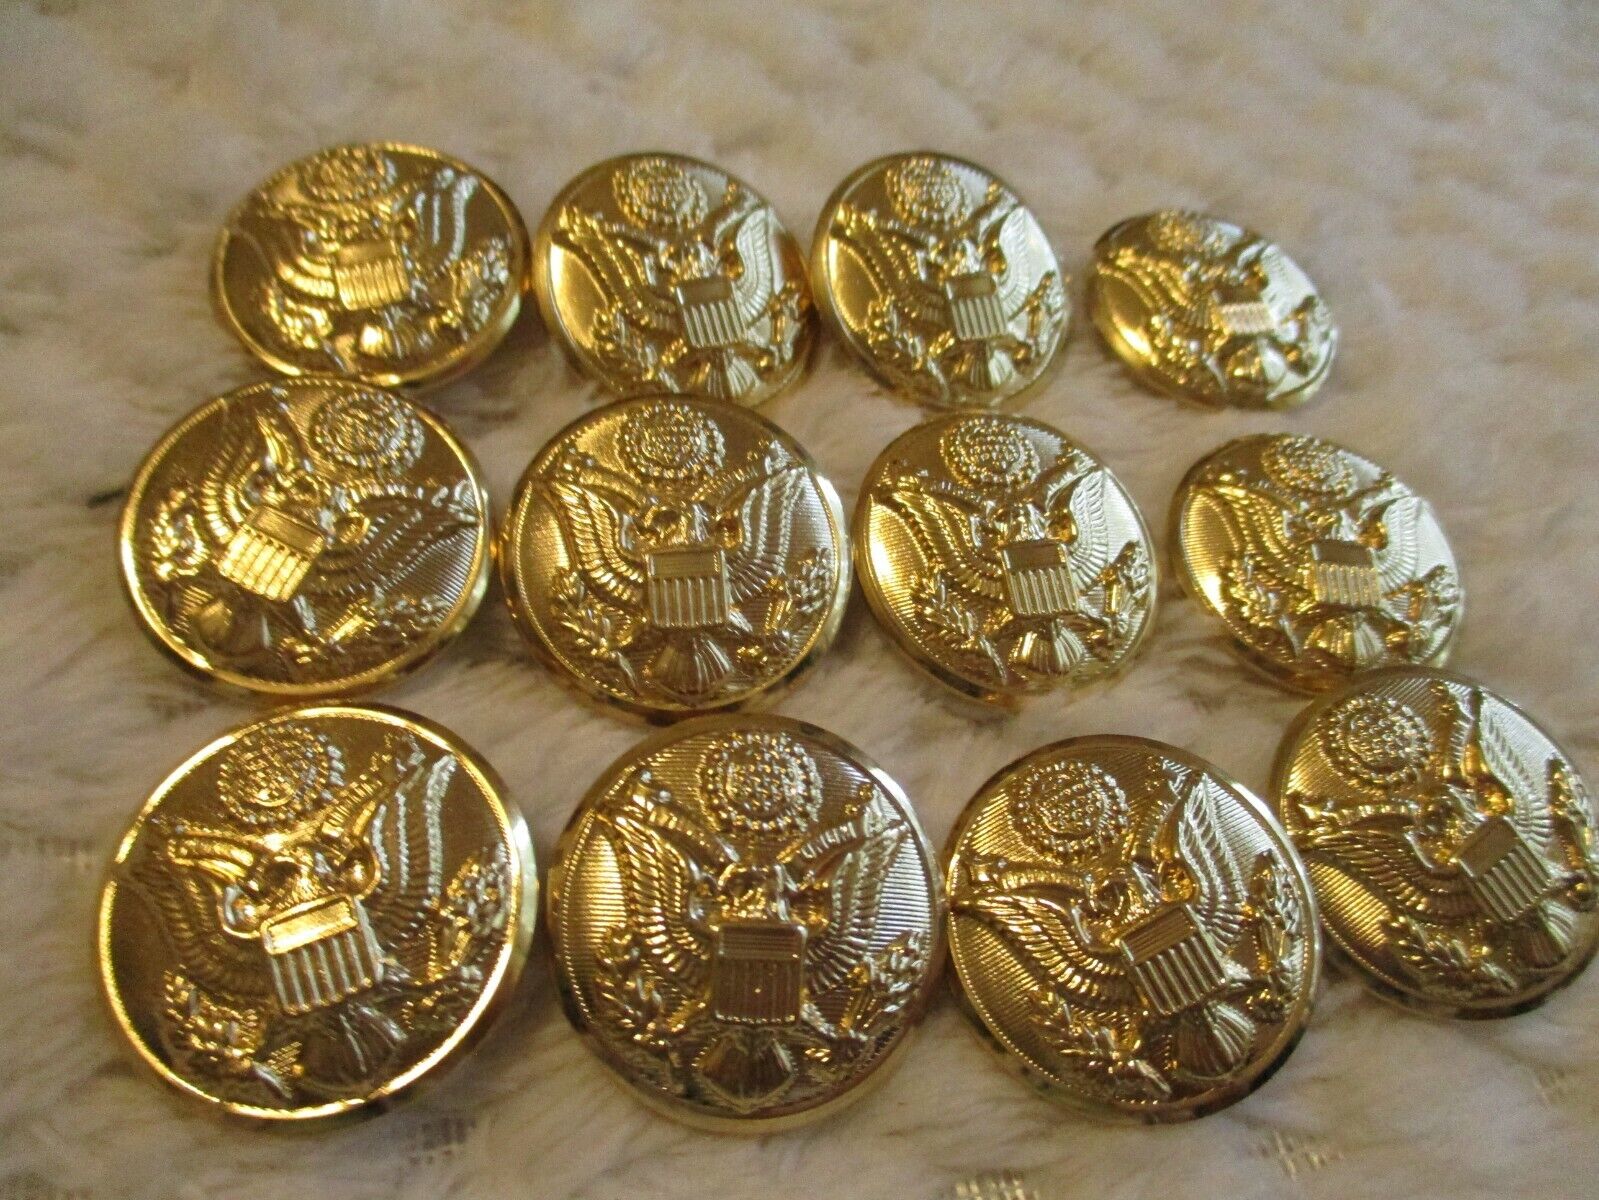 12- 7/8 inch  GREAT SEAL ARMY CLASS A Buttons WATERBURY WIDE SHANK Gold Tone